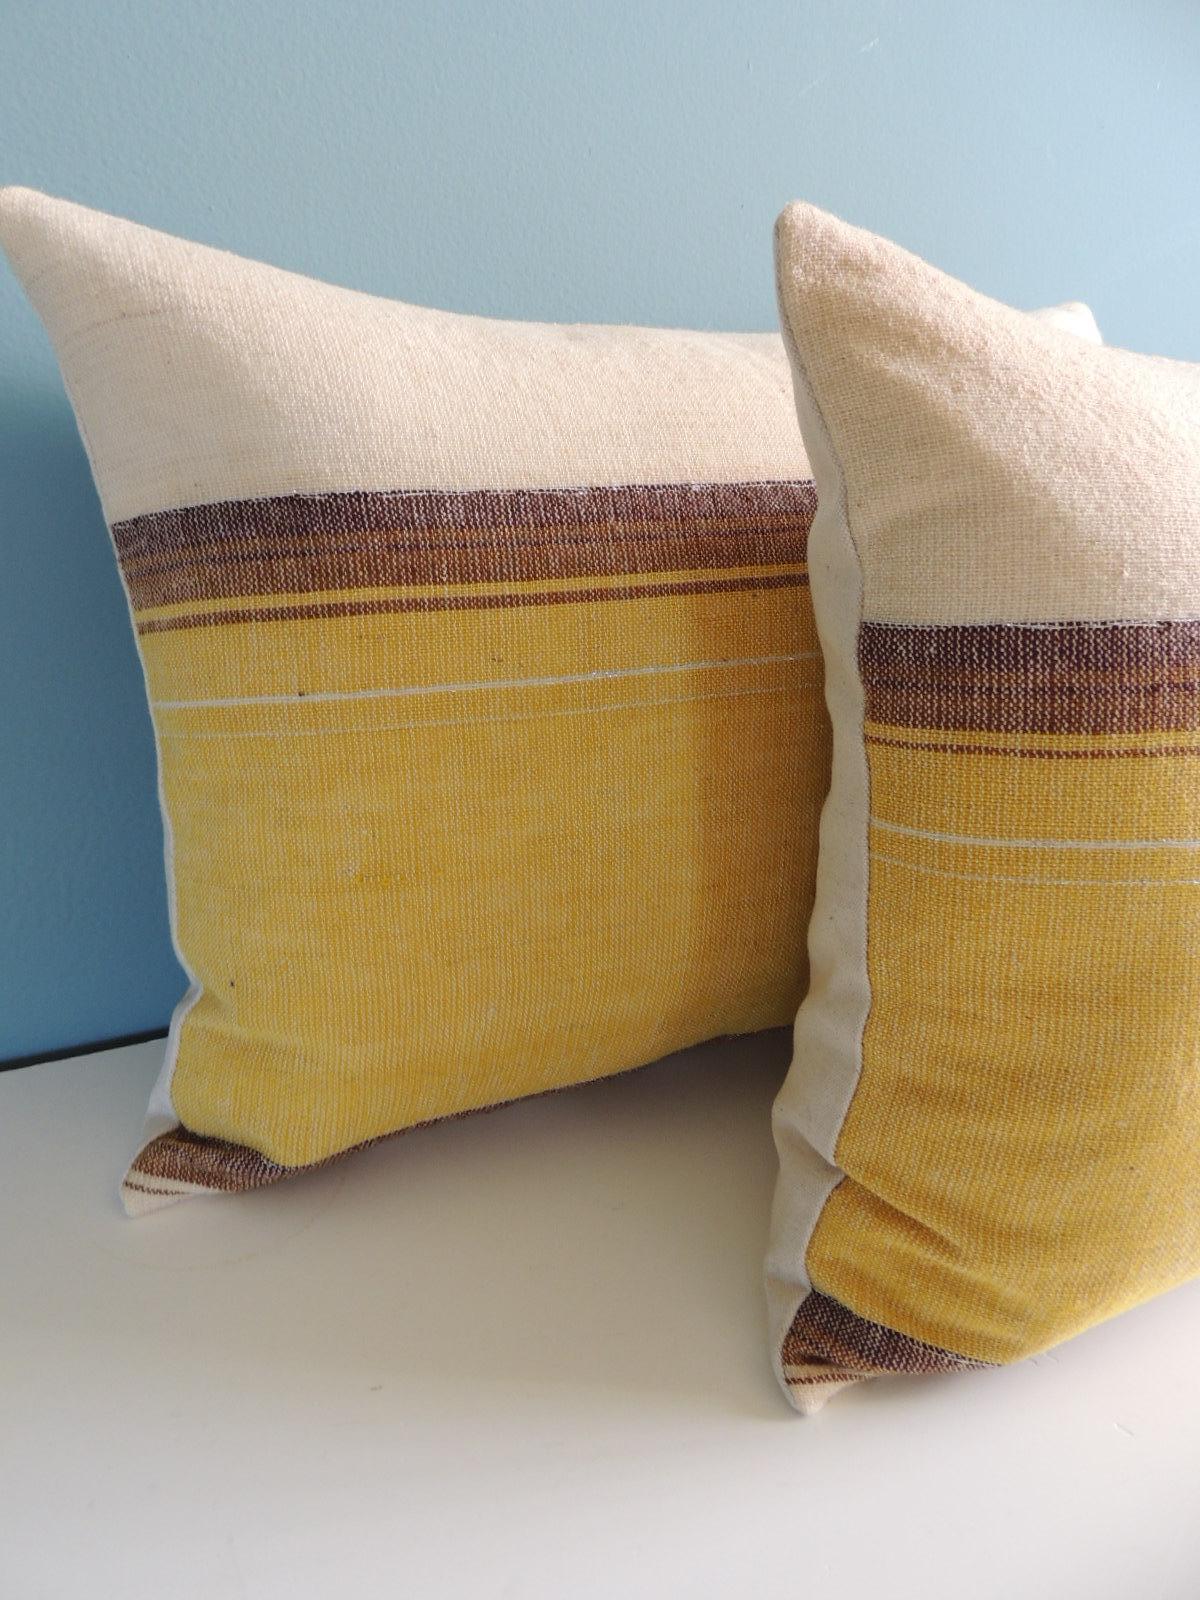 Moroccan Vintage Woven Yellow and Brown Stripe Pattern Decorative Bolster Pillows